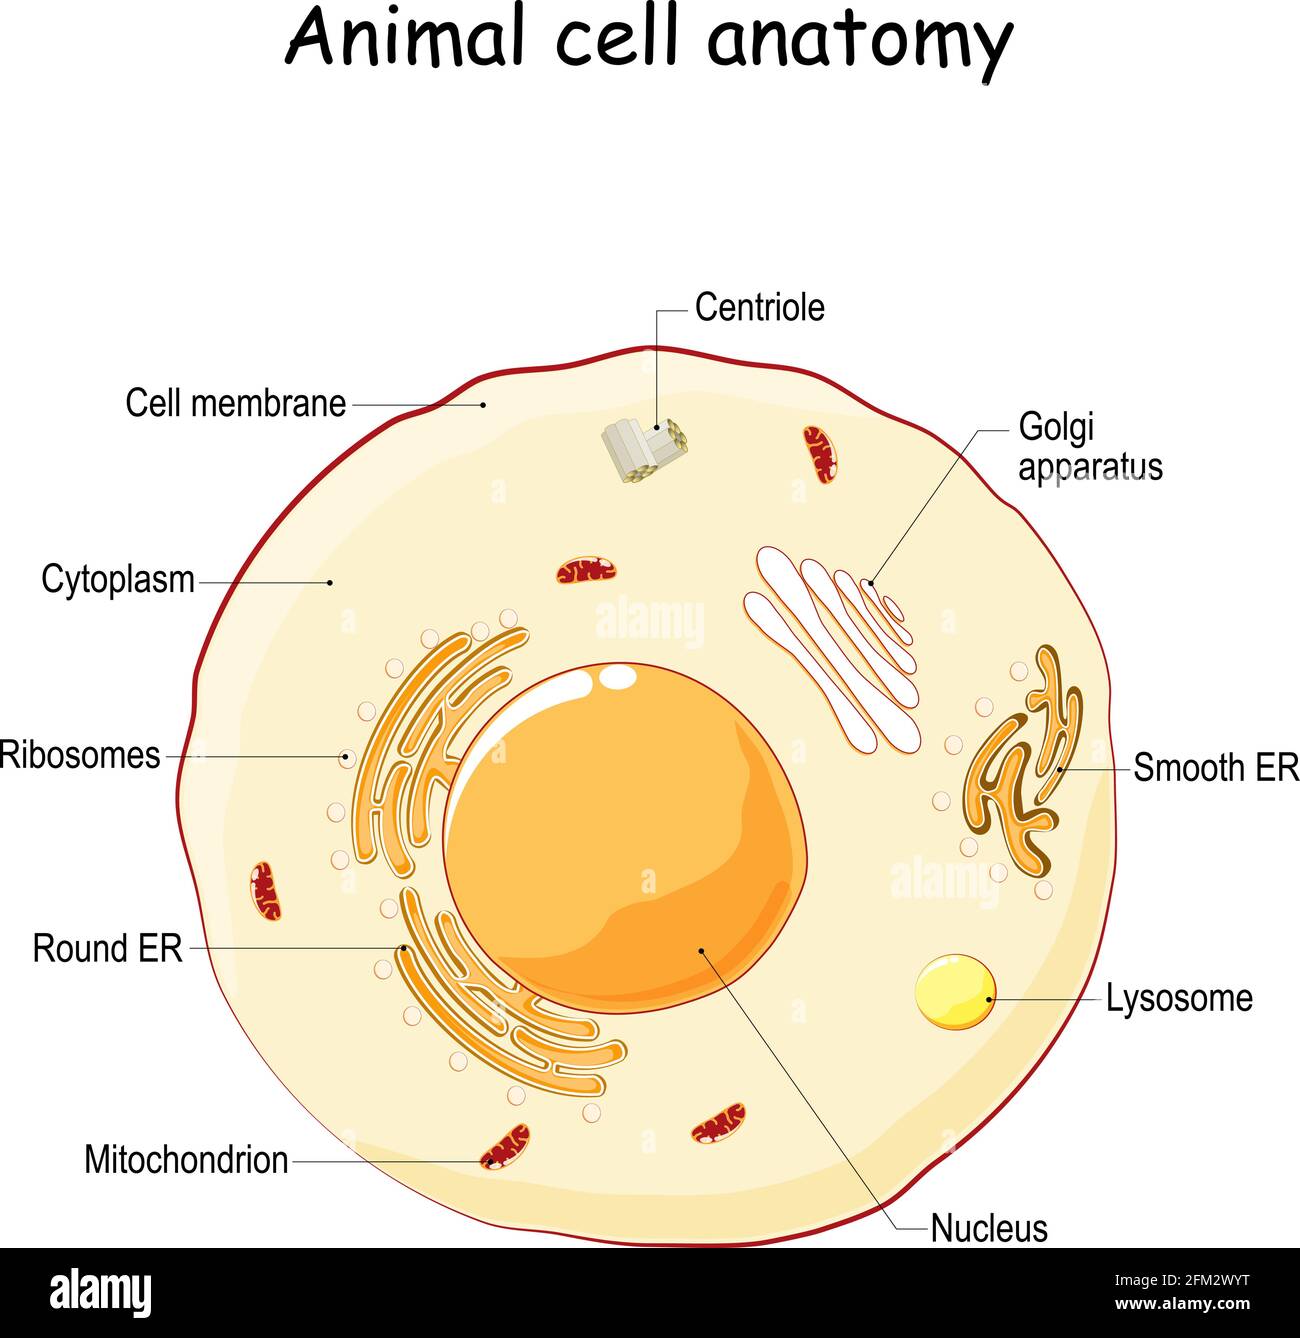 Animal cell anatomy. vector diagram. The structure of a human's cell with labeled parts. cross section of a Eukaryotic cell. Illustration for Biology, Stock Vector